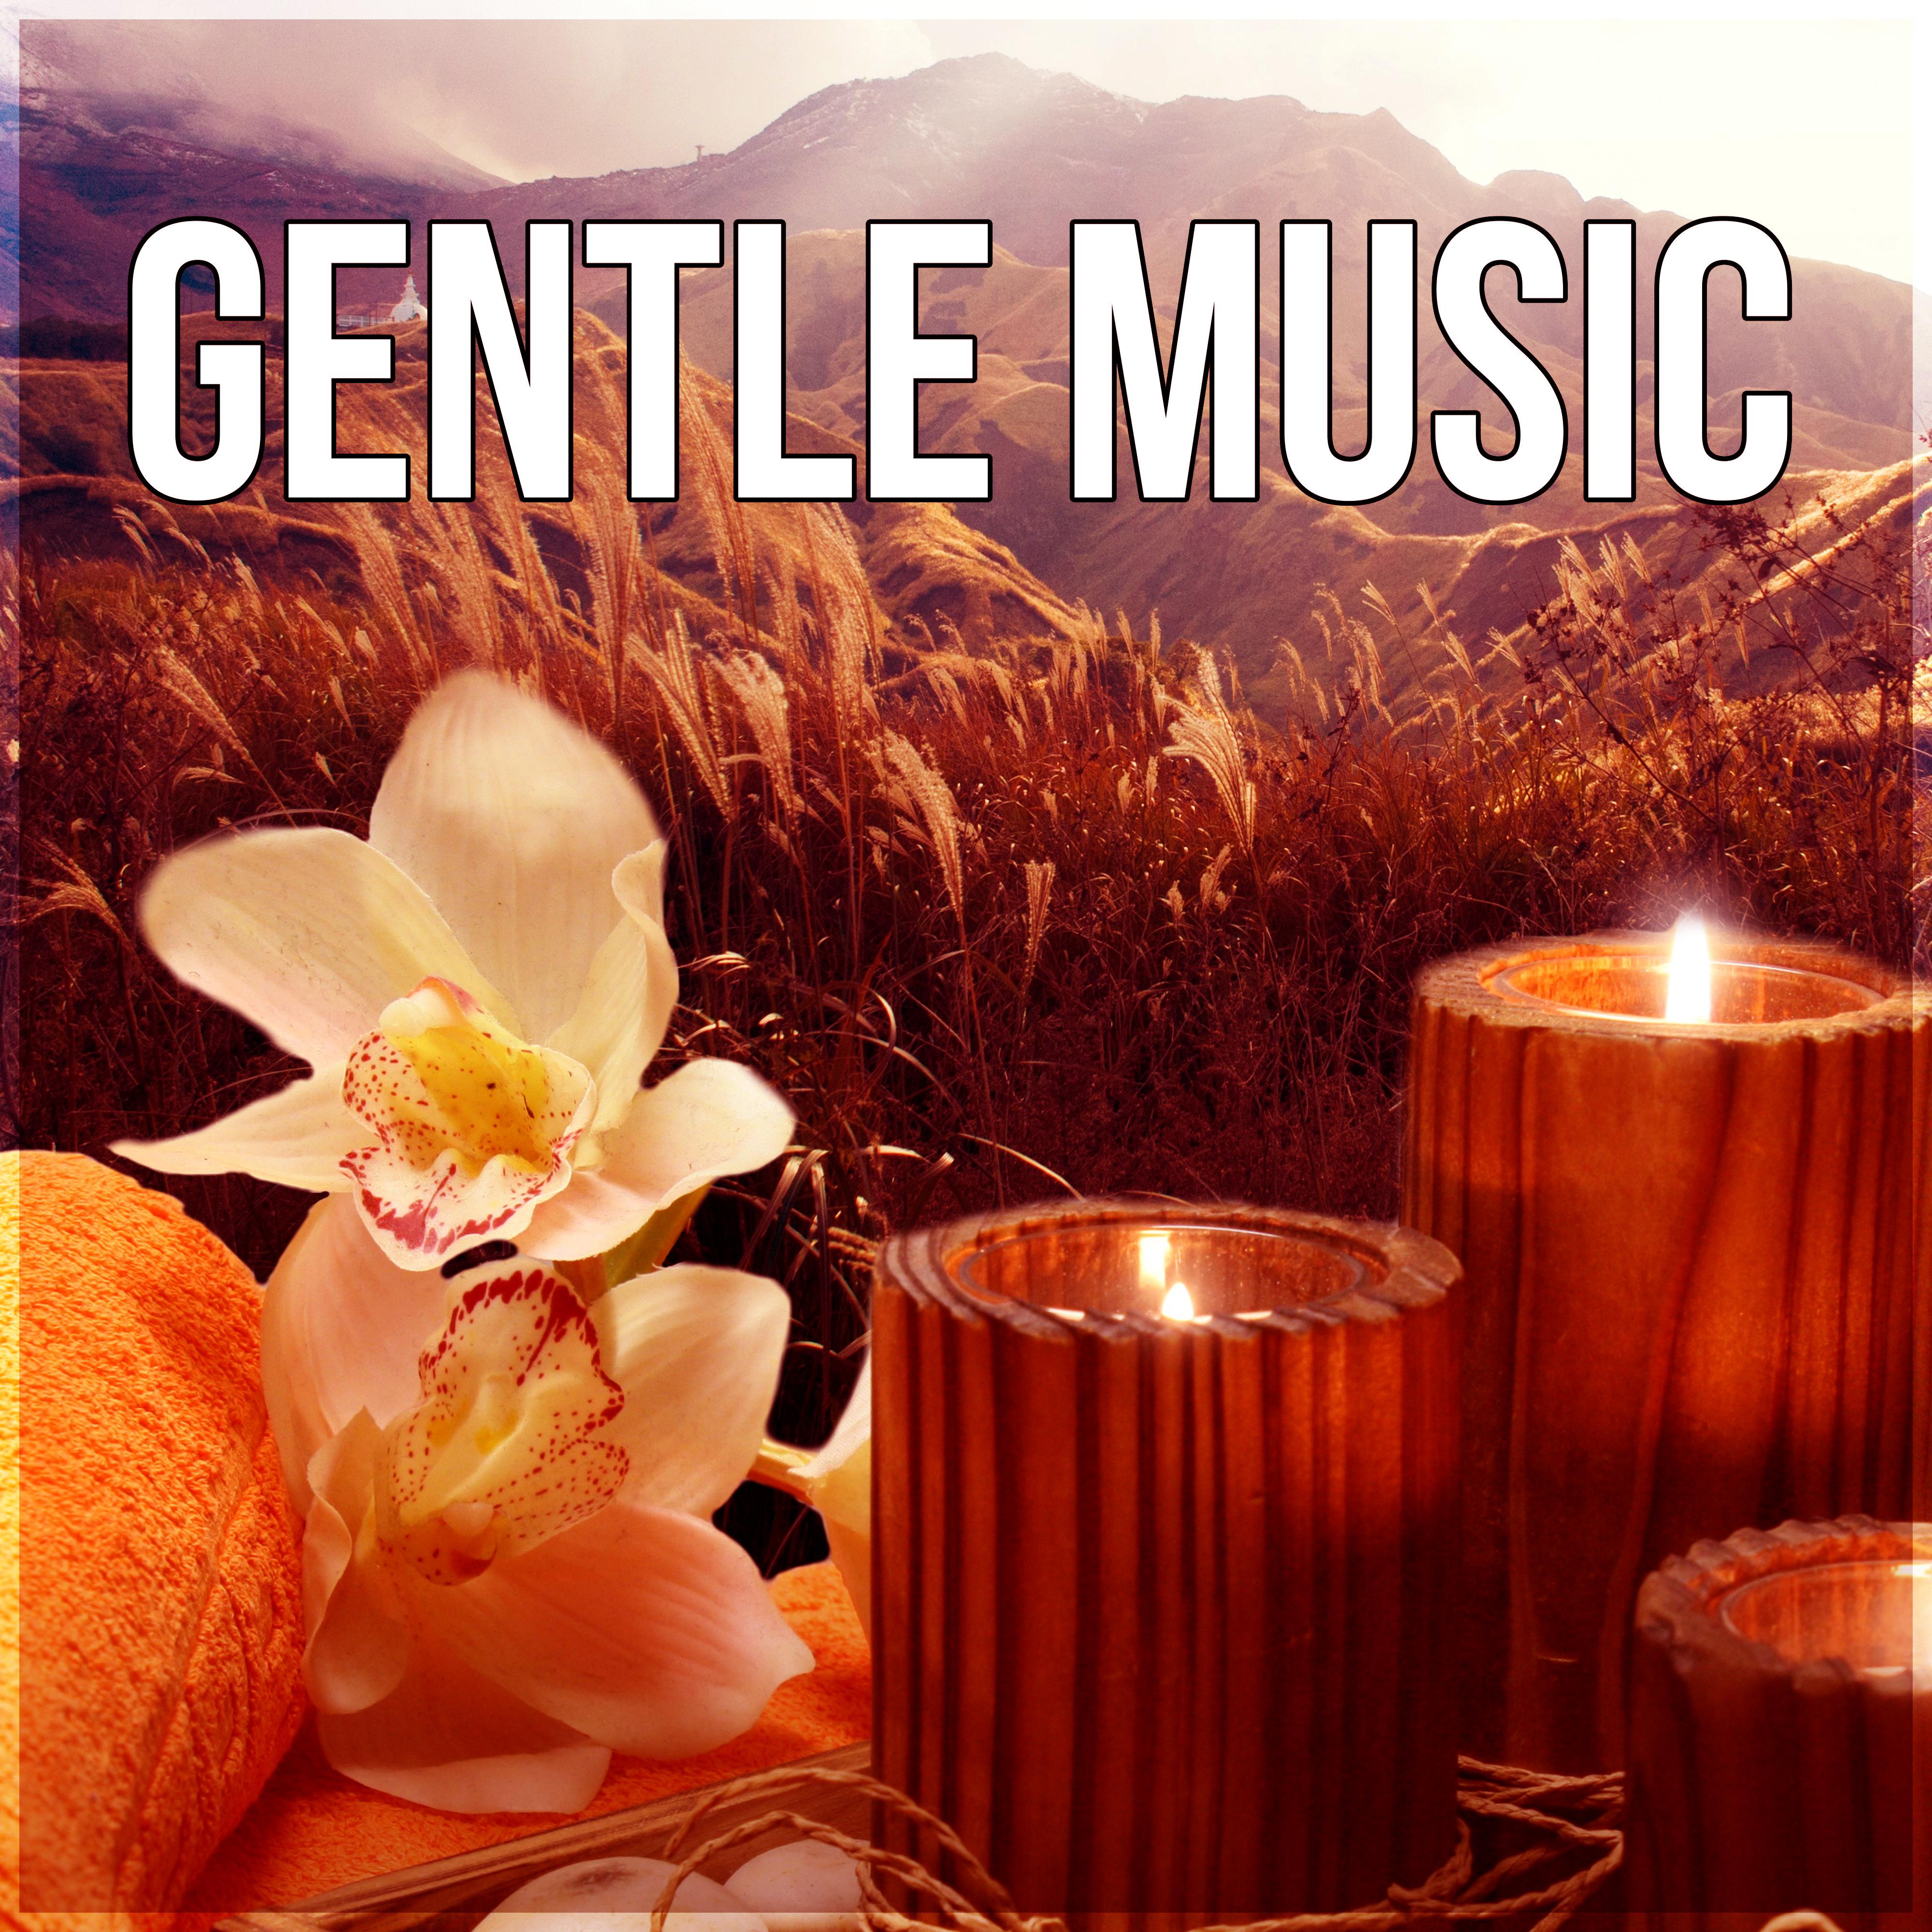 Gentle Music  Spa Sounds, Therapy Music, Nature Sounds, Just Relax, Sound Therapy, Healing Massage, Wellness Spa